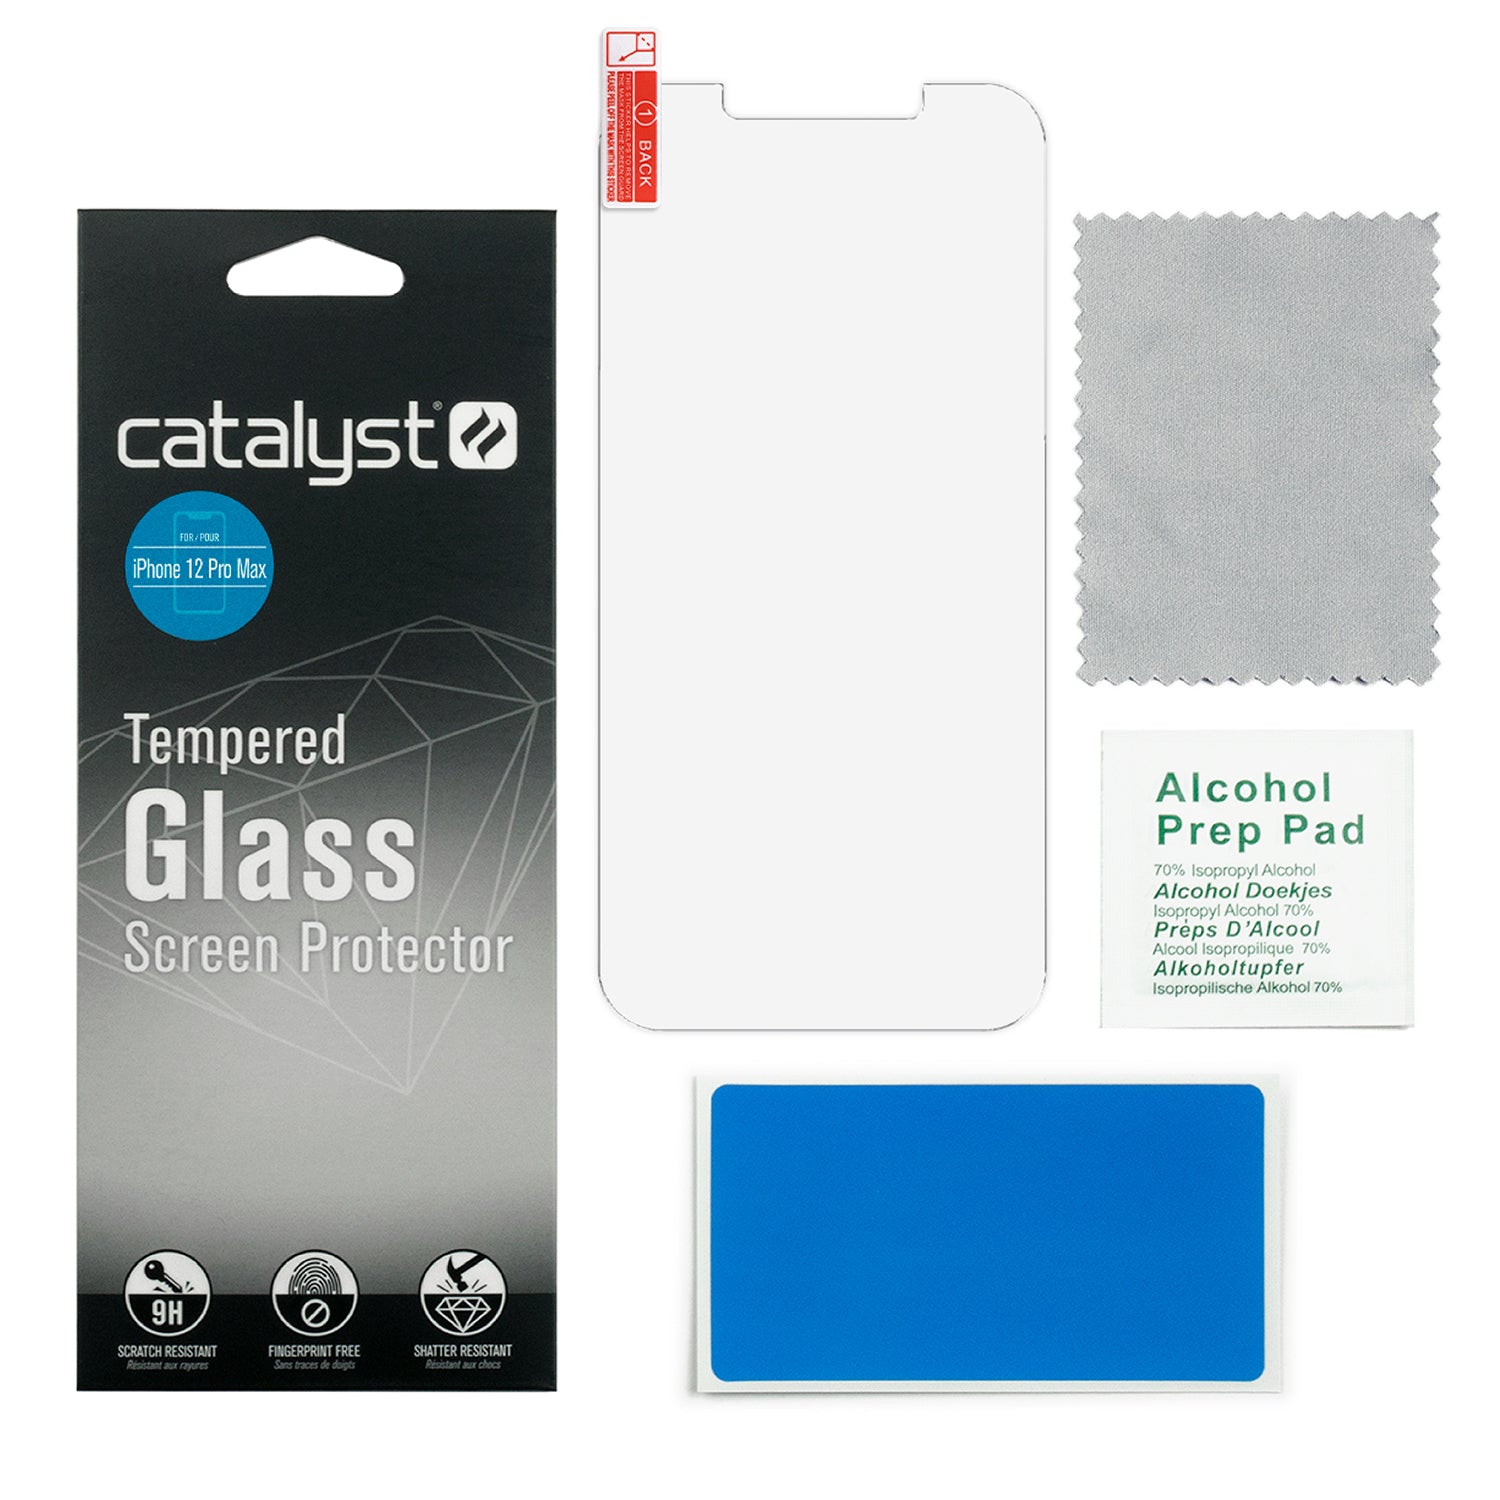 Catalyst Tempered Glass Screen Protector for iphone 12 pro max inside the box includes packaging screen protector cleaning cloth alcohol wipe dust removal sticker text reads packaging screen protector cleaning cloth alcohol wipe dust removal sticker alcohol prep pad